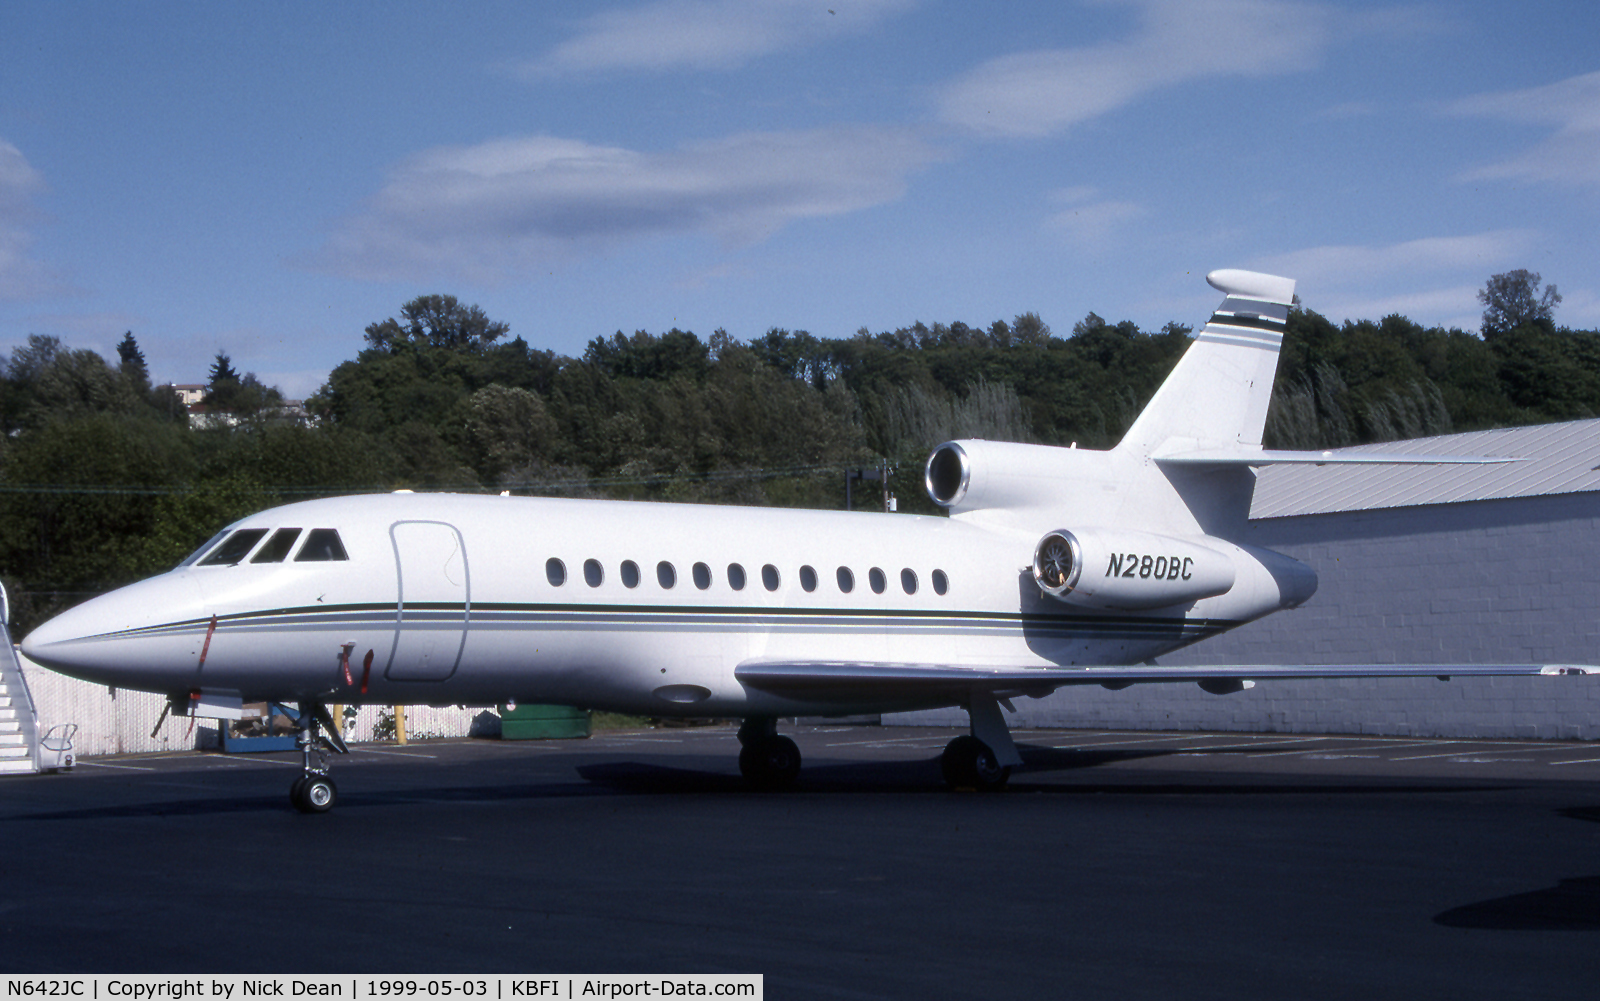 N642JC, 1989 Dassault Falcon 900 C/N 71, Seen here as N280BC this airframe is currently registered N642JC as posted